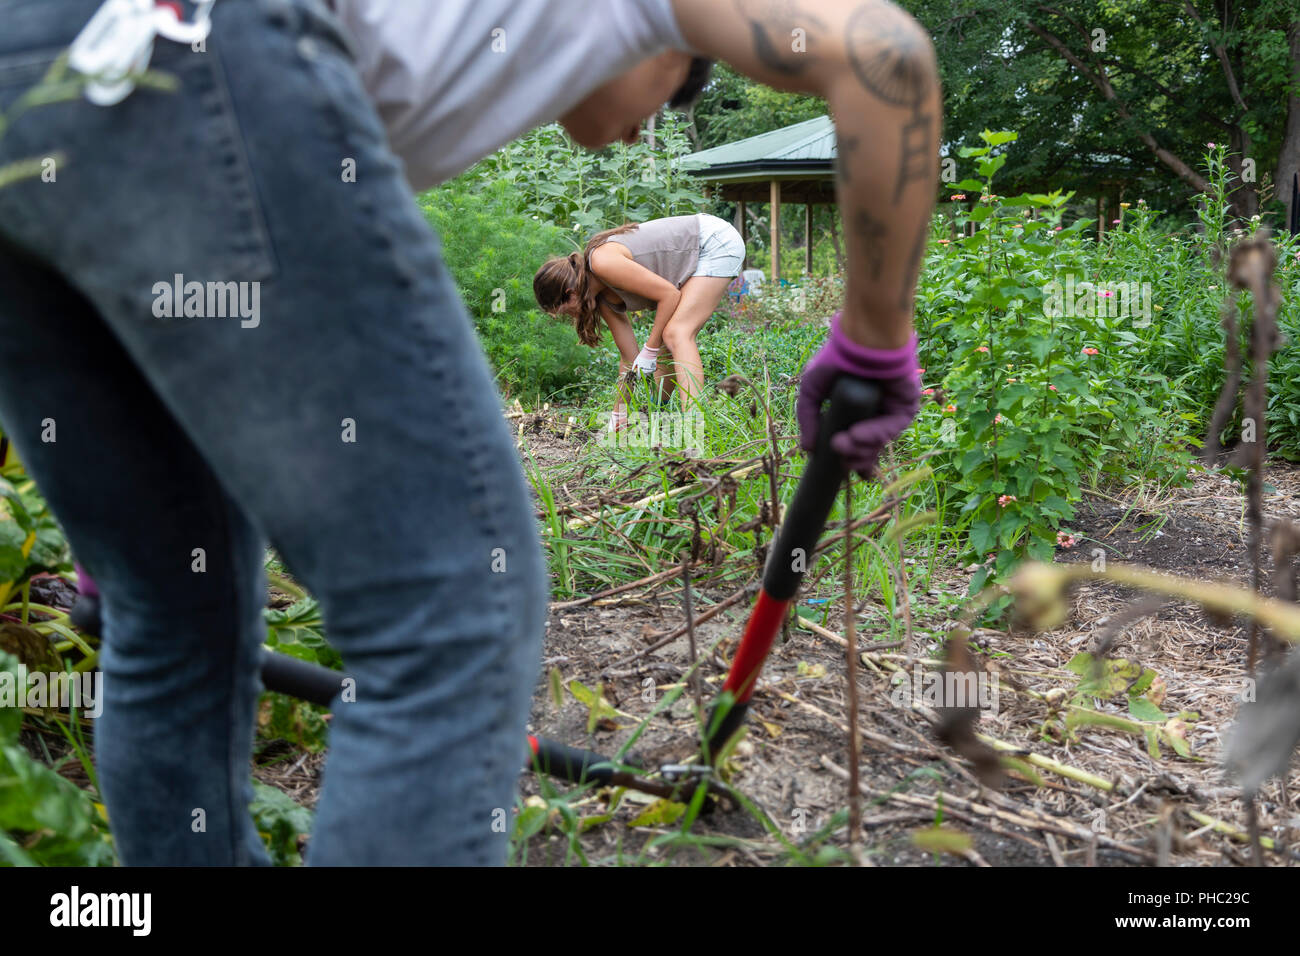 Detroit, Michigan - Women pull weeds at Detroit Abloom, a nonprofit cut flower farm created on vacant land in the Jefferson-Chalmers neighborhood. The Stock Photo